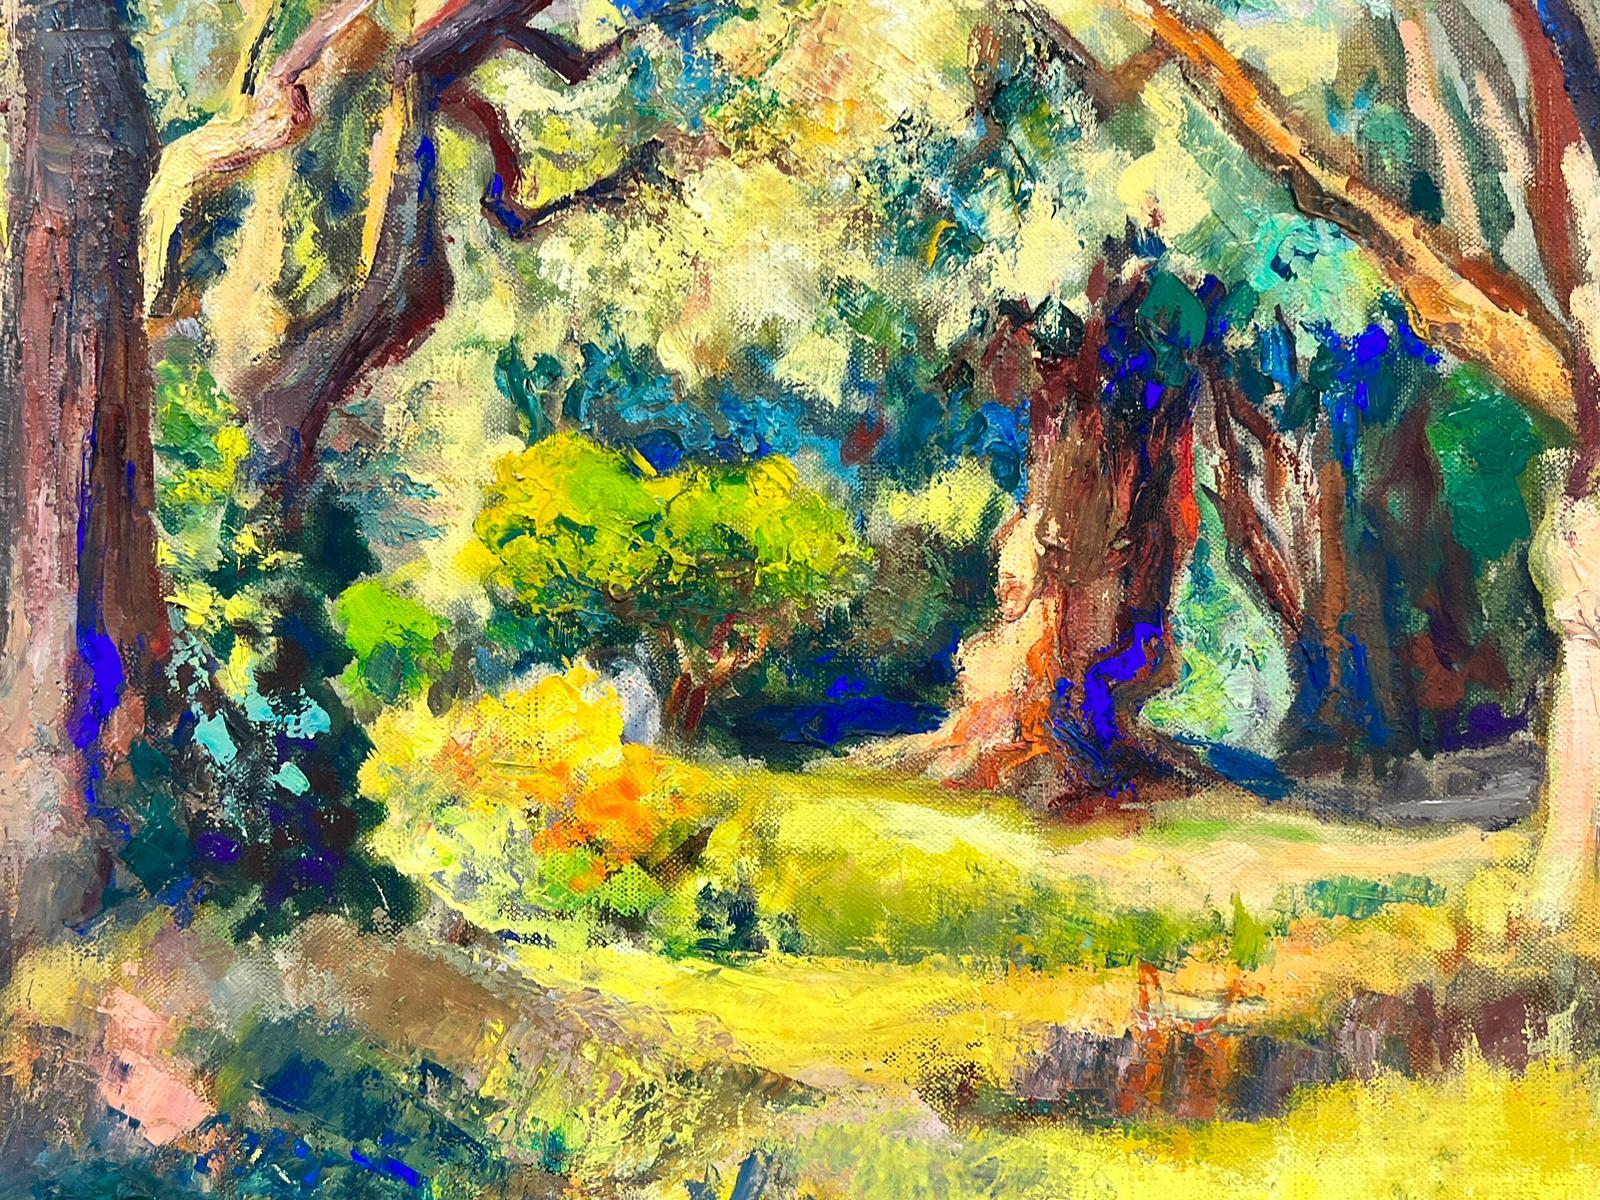 Summer Woodland
by Josine Vignon (French 1922-2022) 
signed verso, dated 1954
oil painting on canvas, unframed
canvas: 21 x 29 inches

Very good condition

Provenance: from the artists estate, France

Josine Vignon (1922-2022) was a French artist